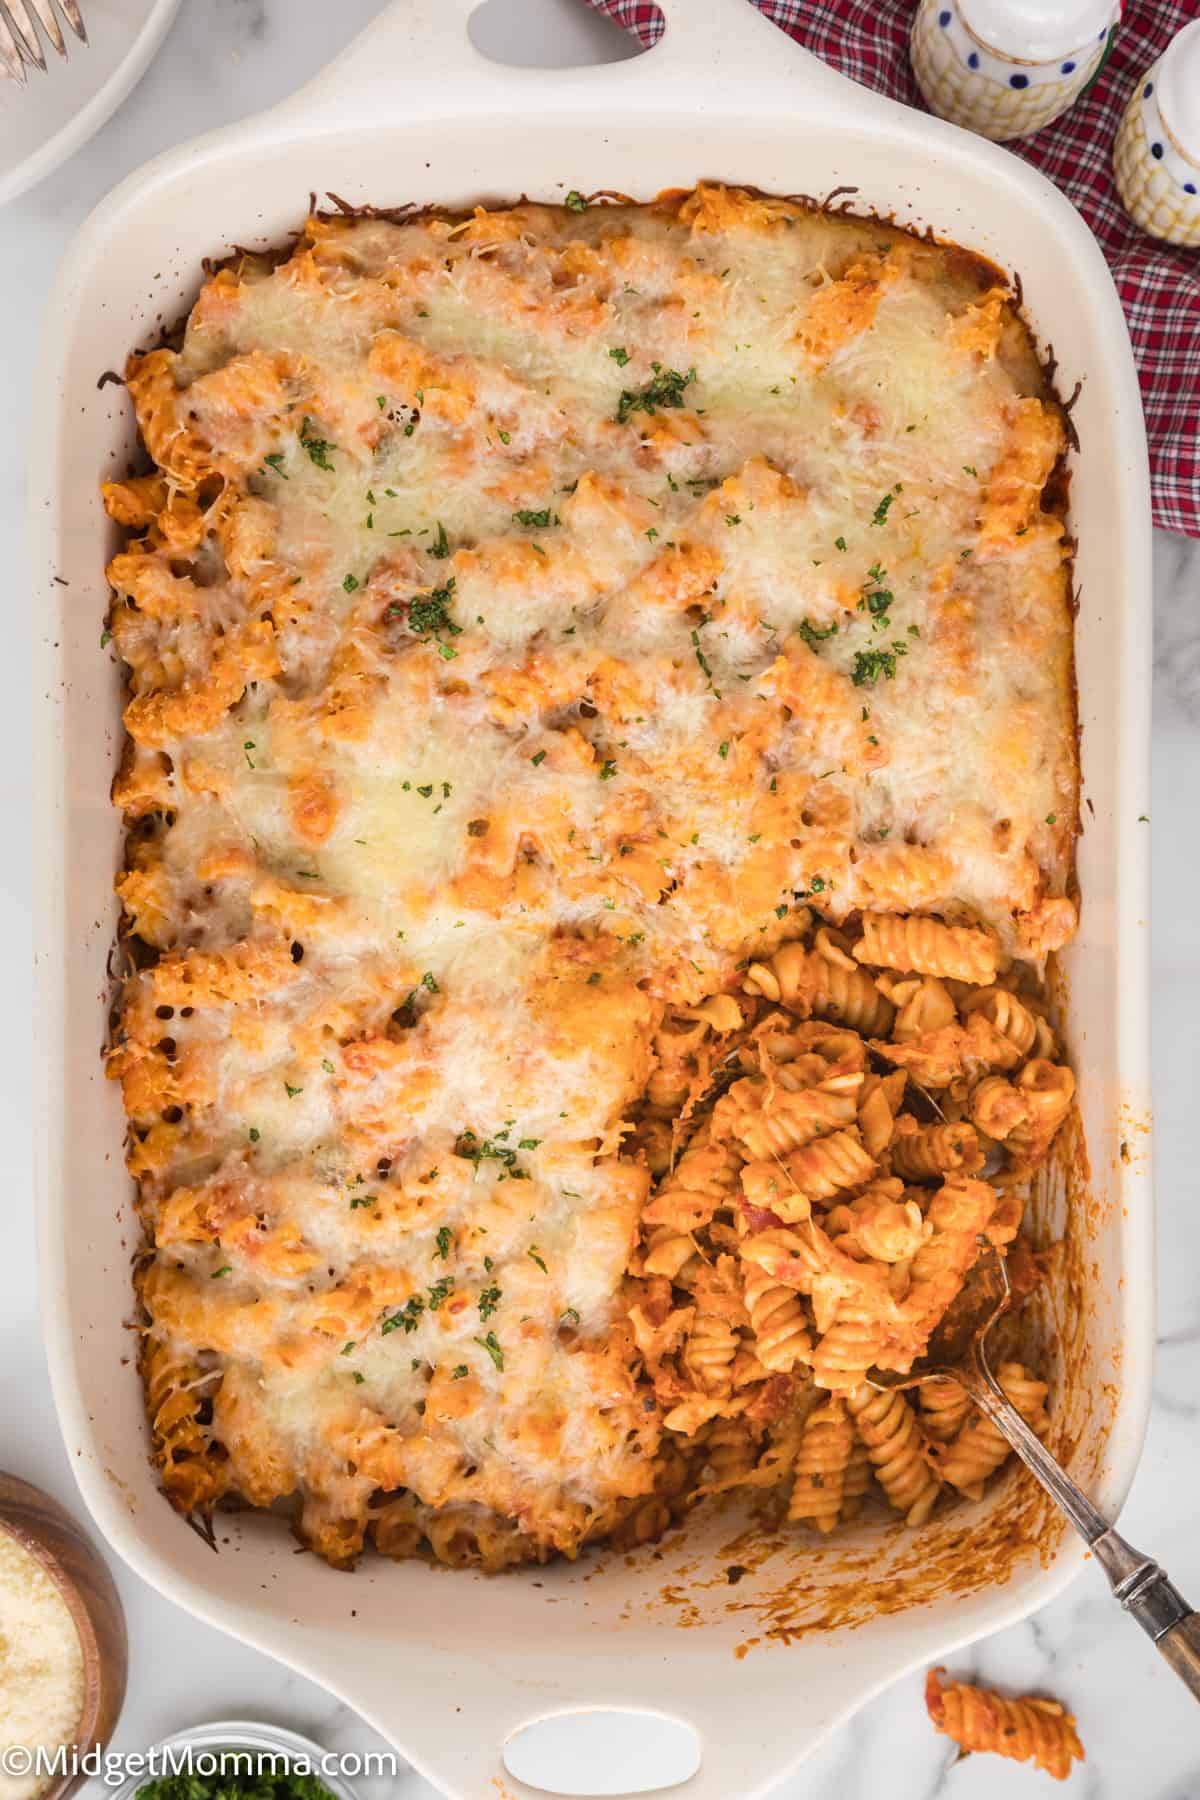 Baked pasta casserole made with alfredo sauce and tomato sauce with a golden cheese topping in a white dish, partially served.